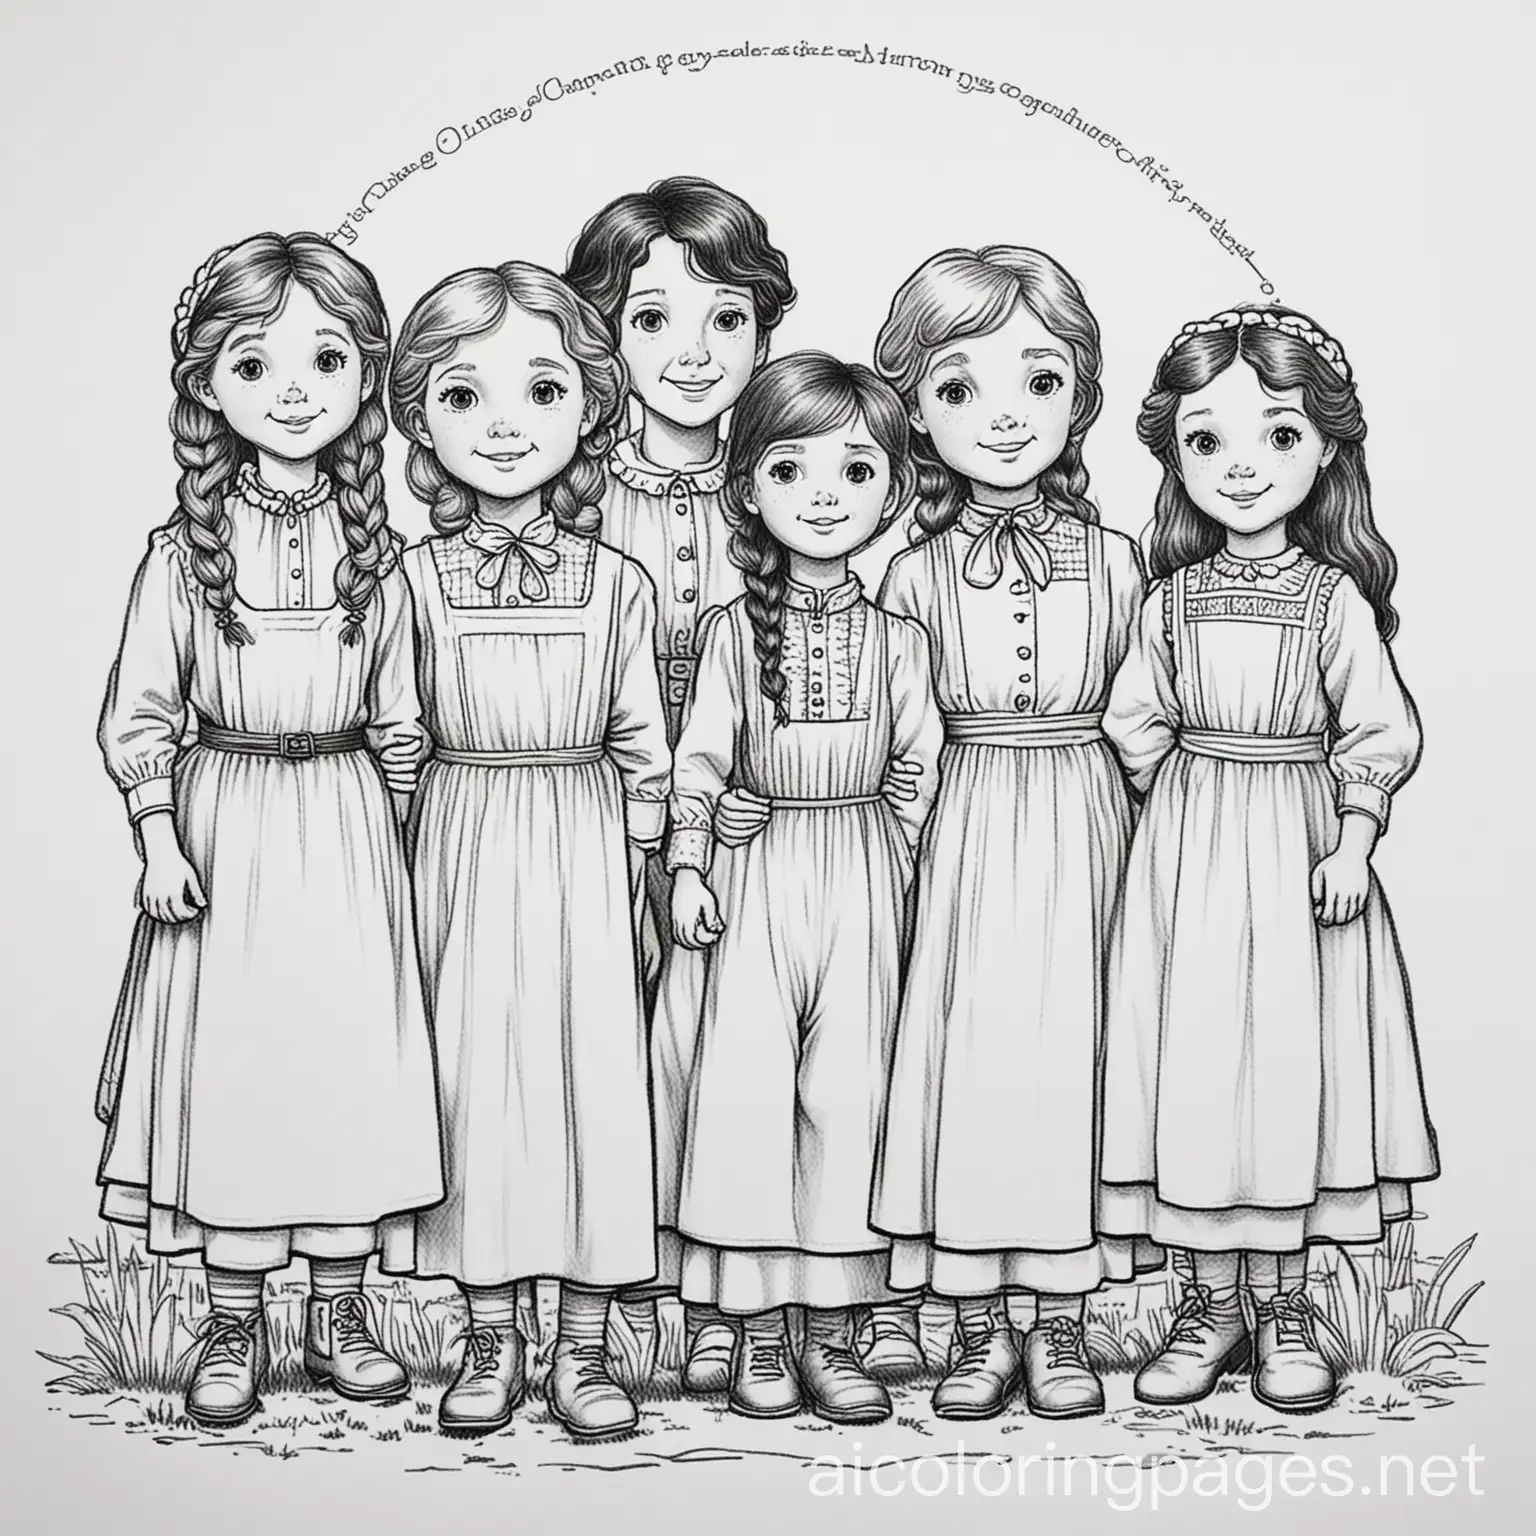 Little House on the prairie characters, Coloring Page, black and white, line art, white background, Simplicity, Ample White Space. The background of the coloring page is plain white to make it easy for young children to color within the lines. The outlines of all the subjects are easy to distinguish, making it simple for kids to color without too much difficulty